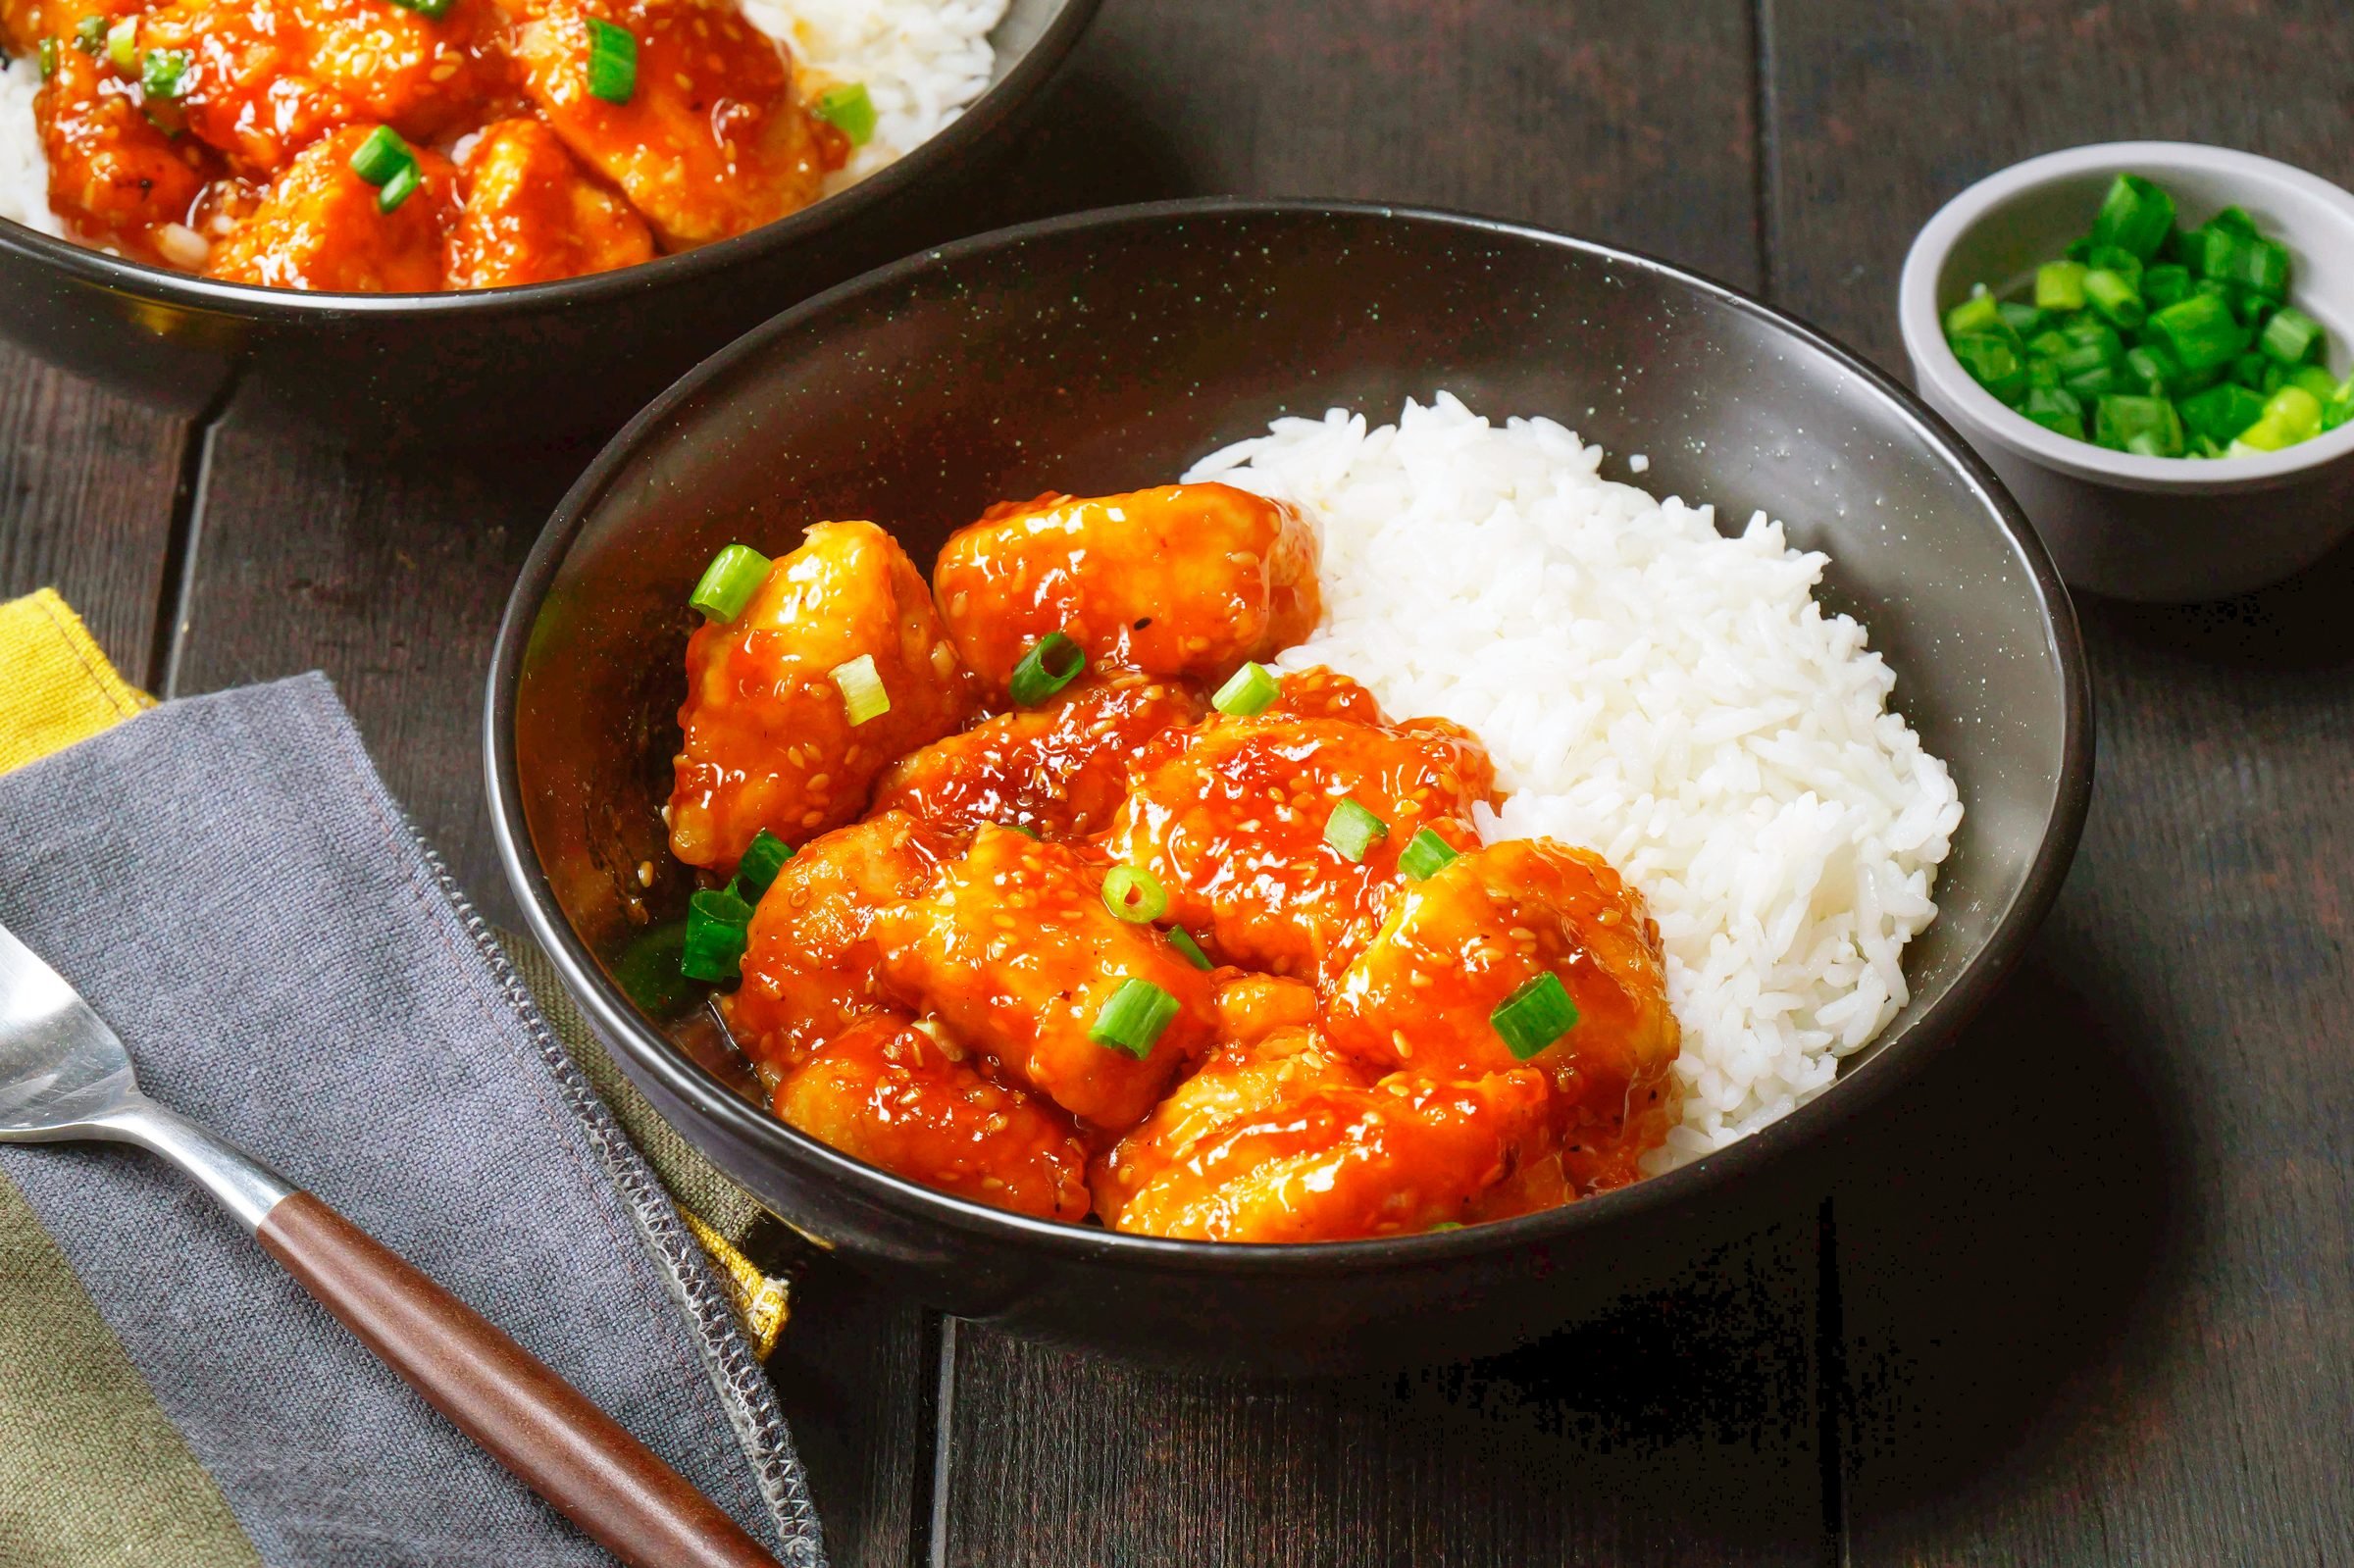 How to Make Sesame Chicken Just Like Your Favorite Take-Out Order